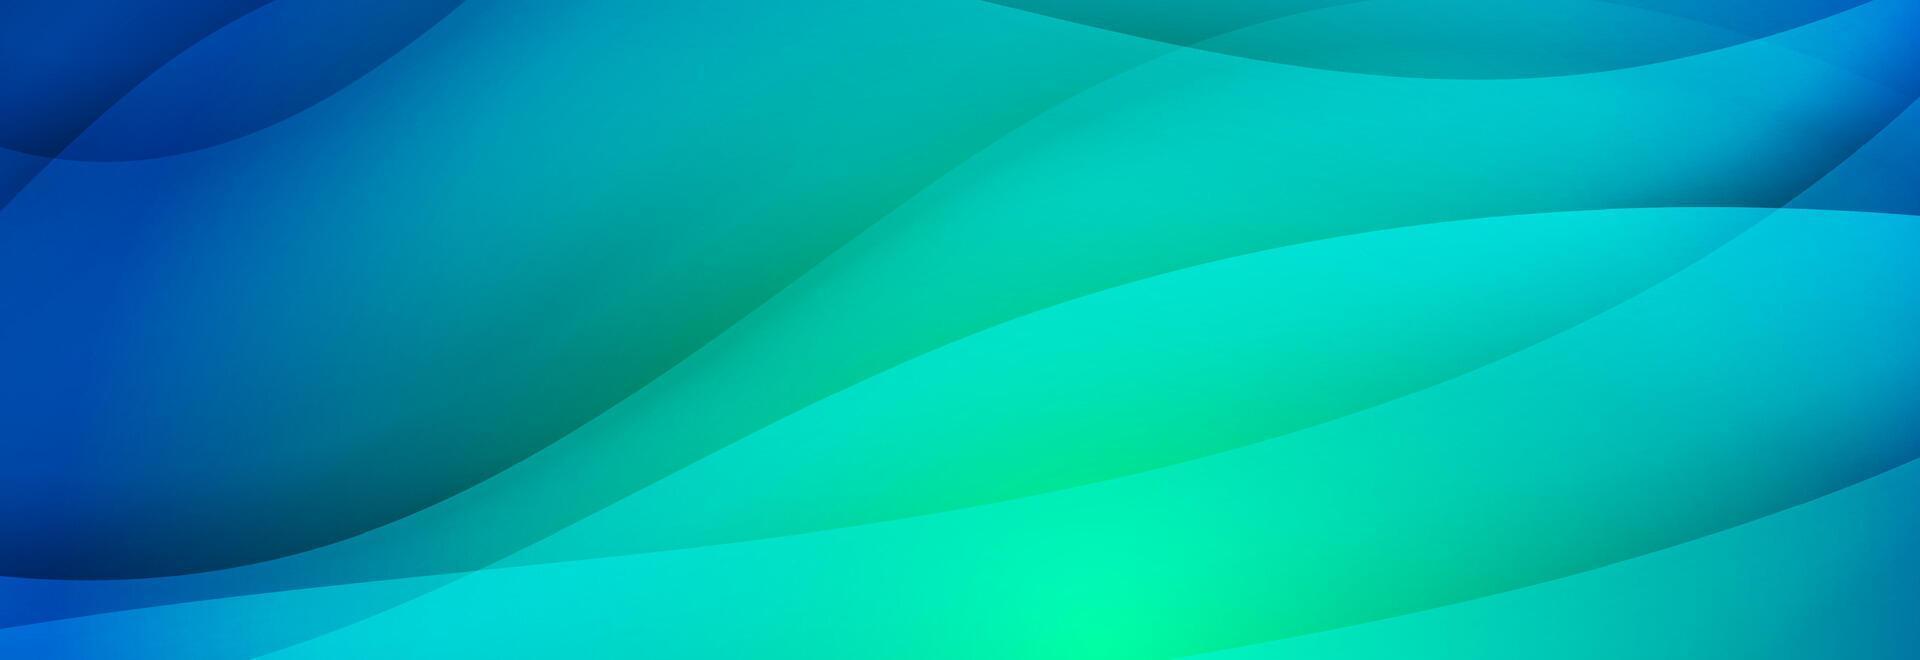 Abstract green blue glossy smooth waves background vector